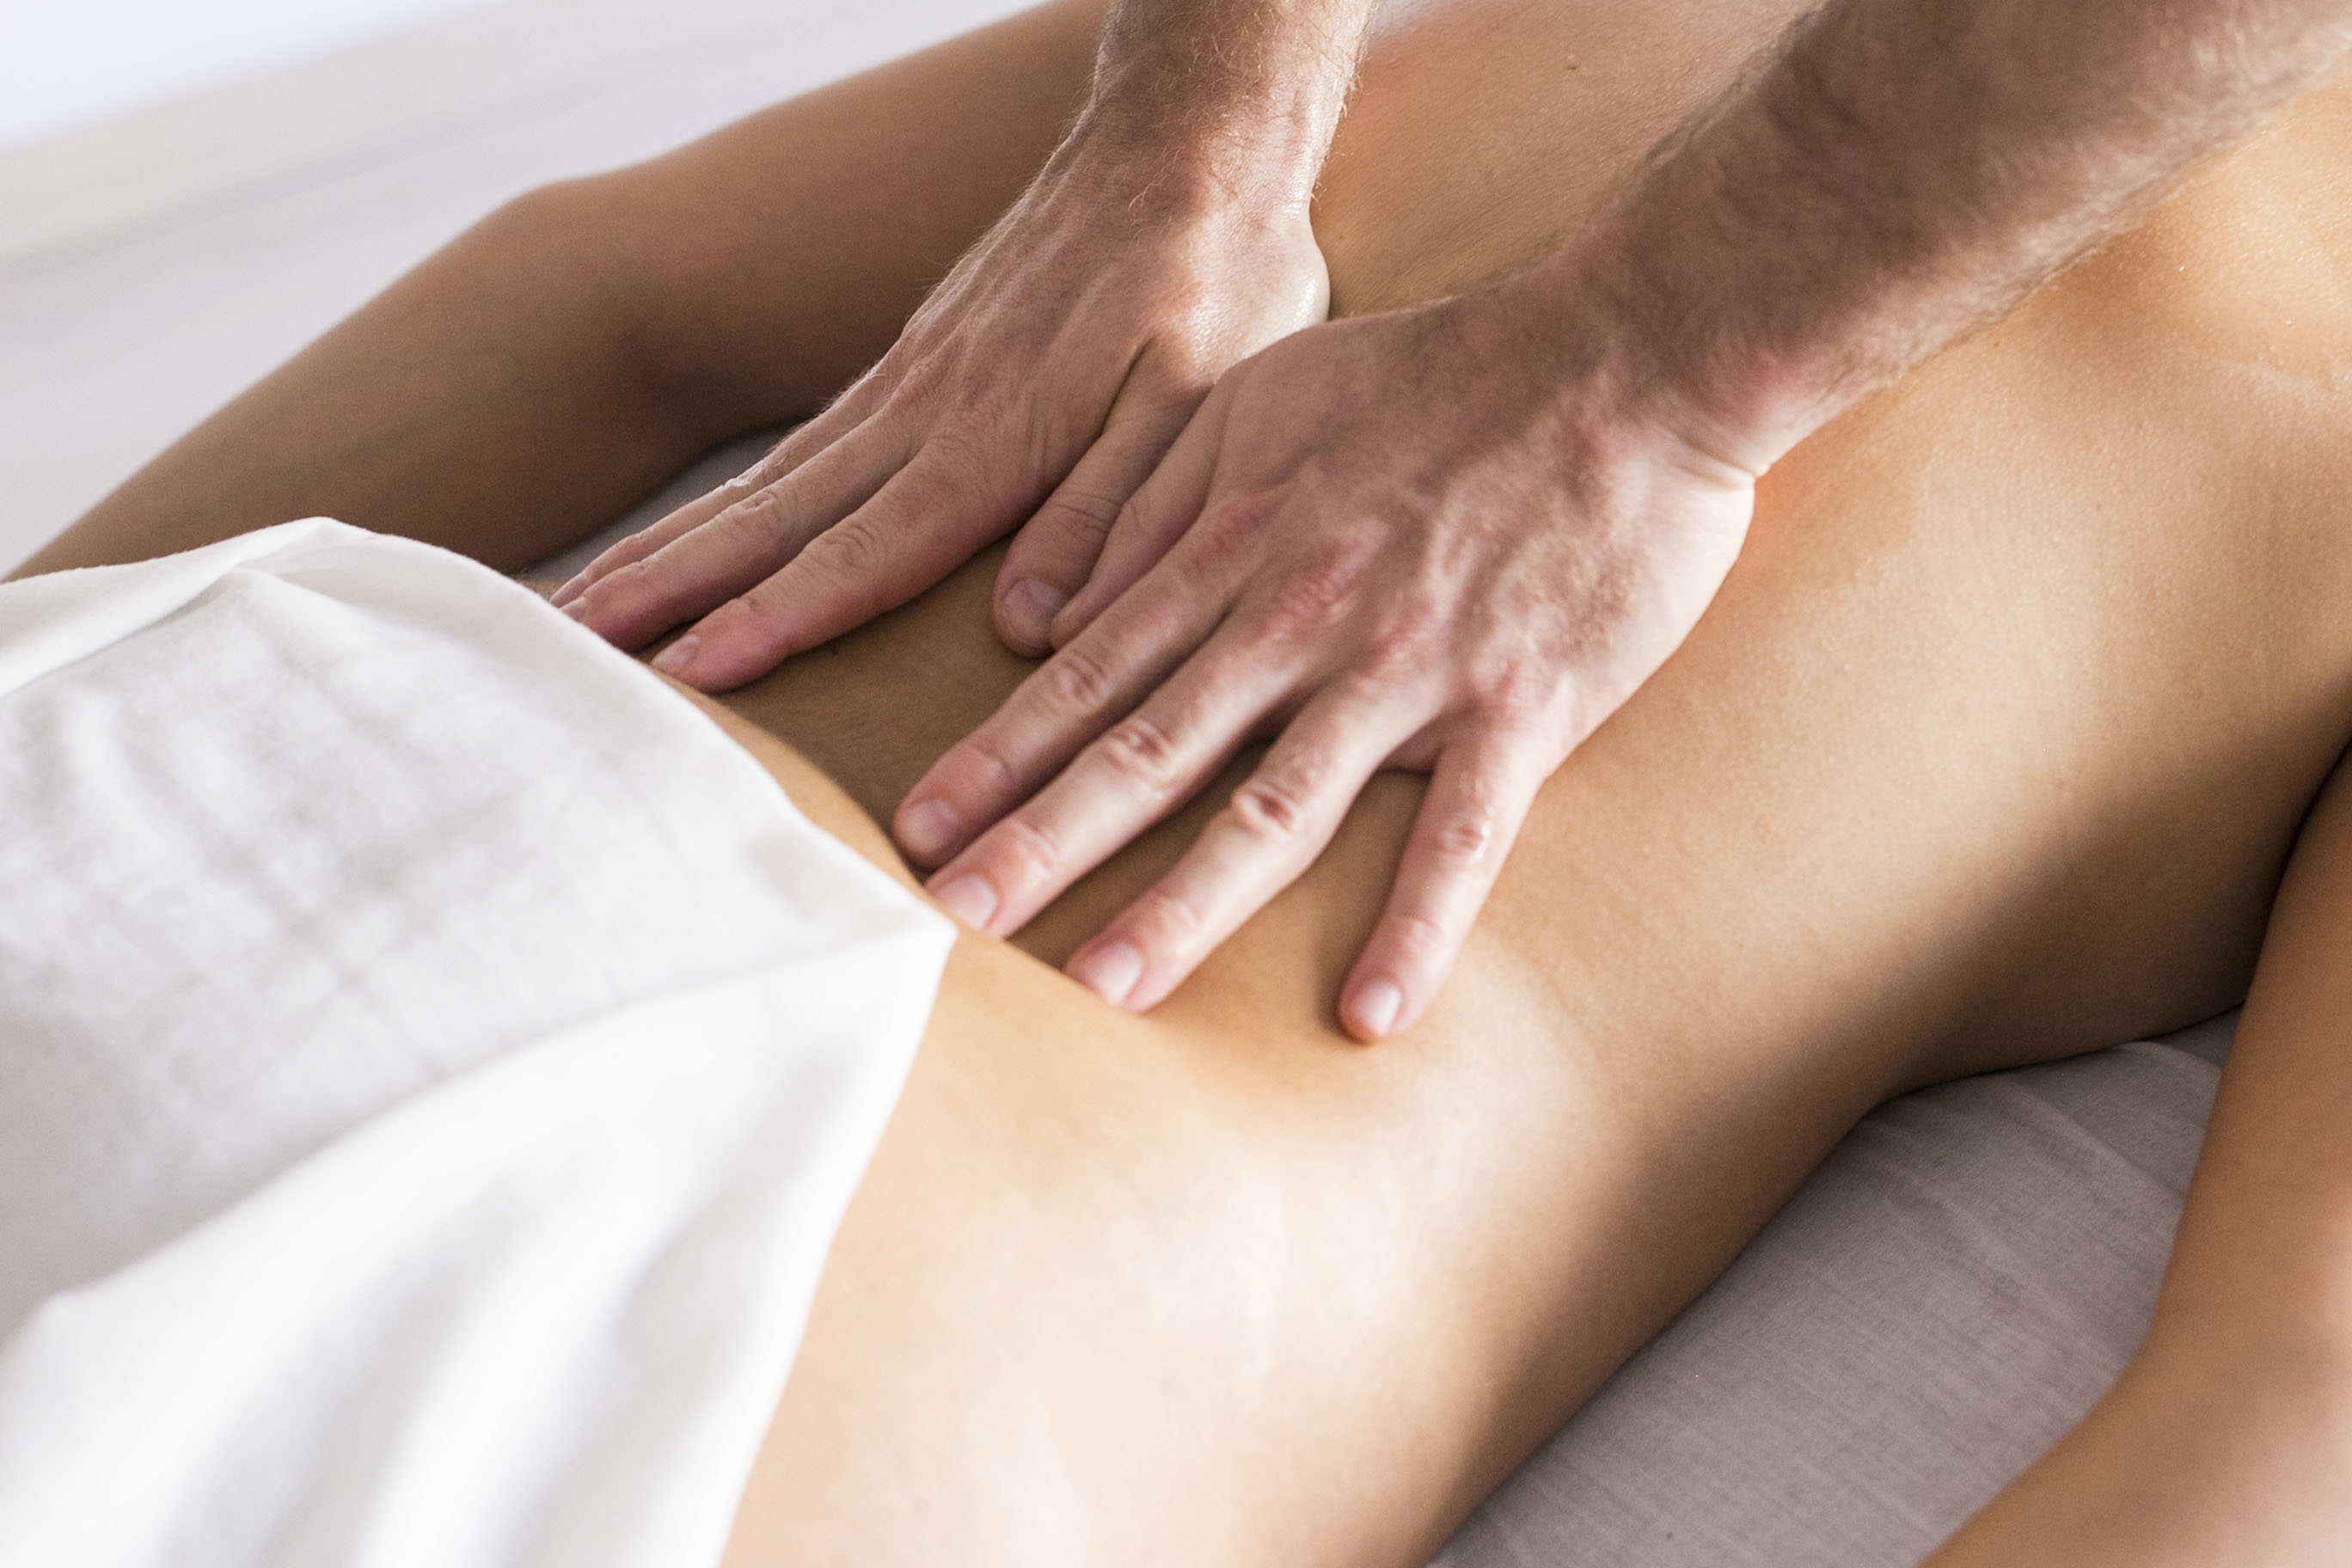 MASSAGE THERAPY – Roger Jackson